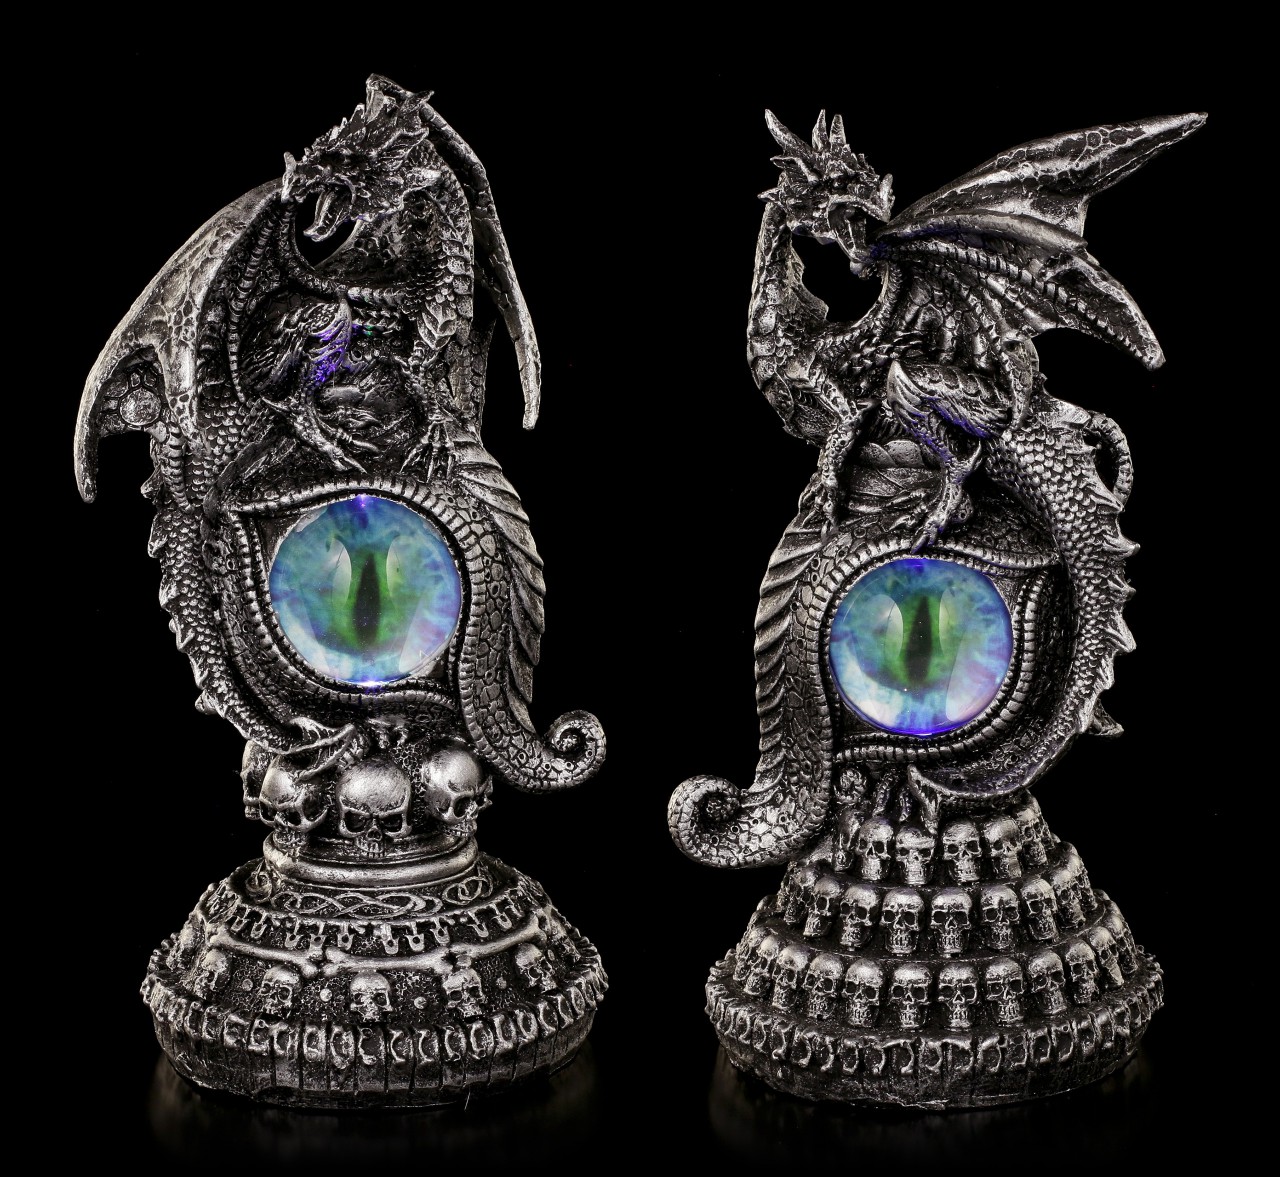 Dragon Figurines with Eyes & LED - Set of 2